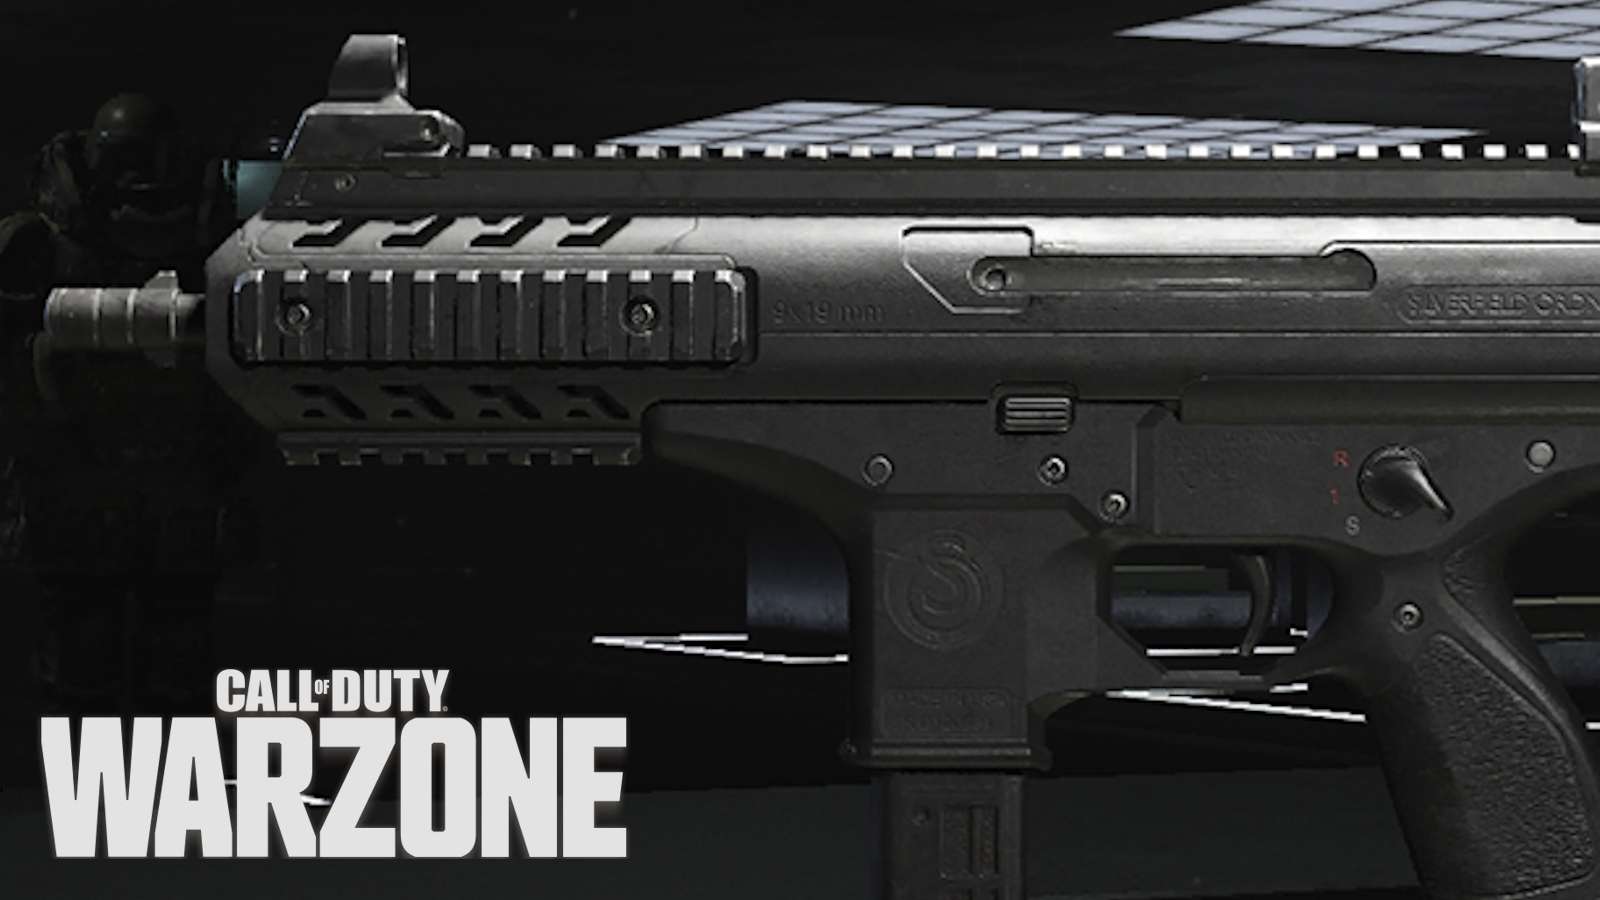 HRM-9 SMG with Warzone logo.